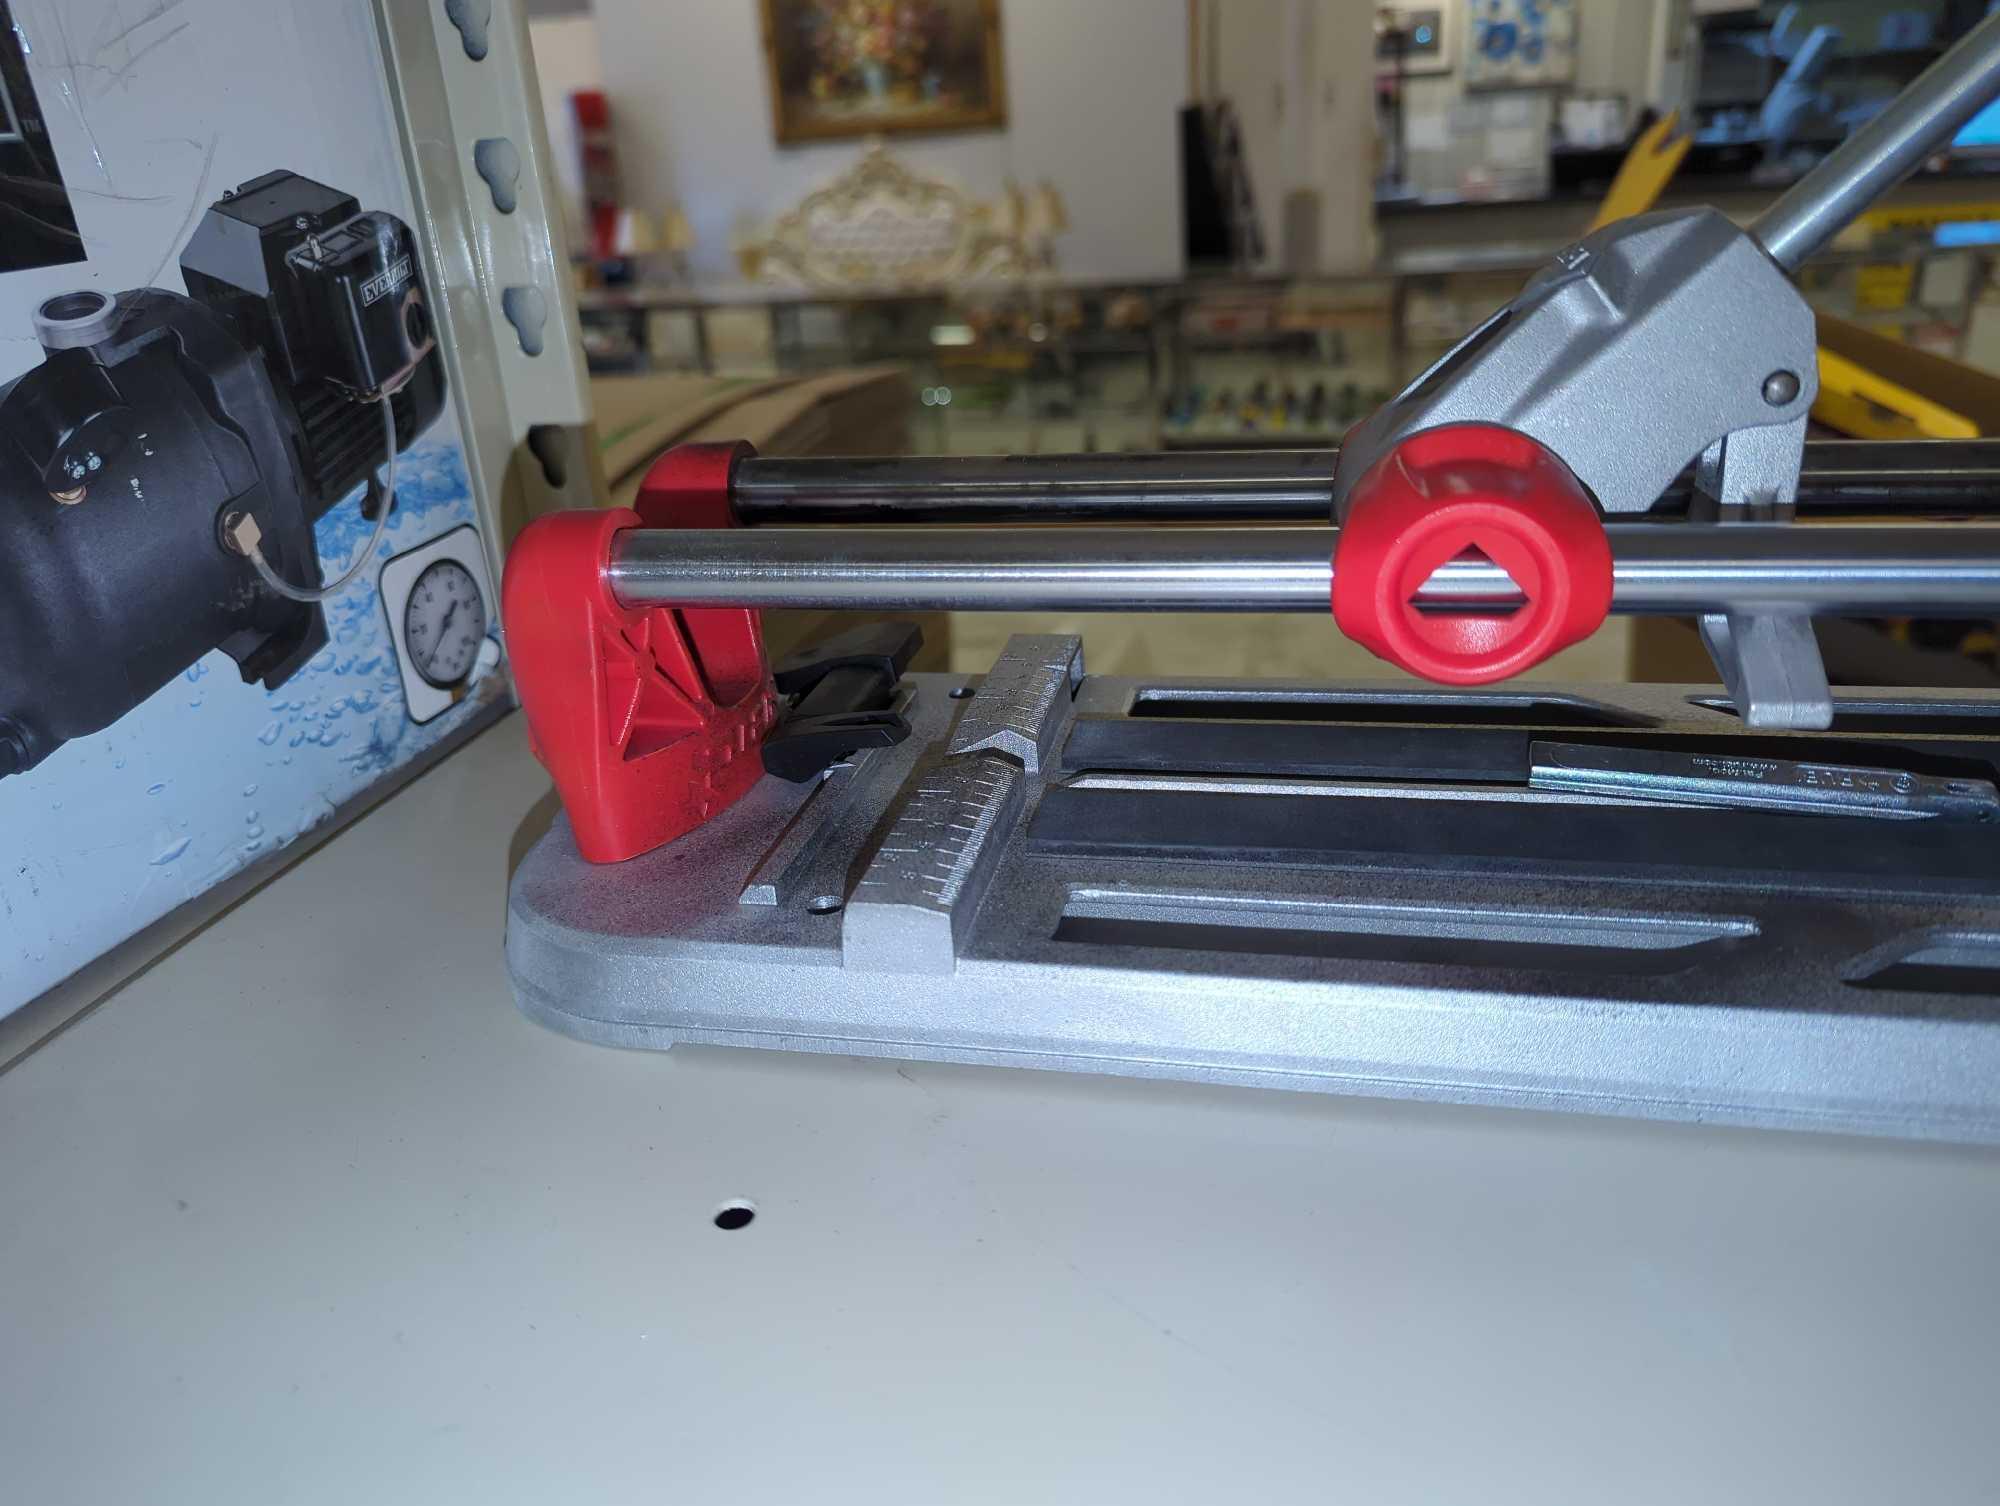 Rubi 26 in. Star Max Tile Cutter, Appears to be Used Out of the Box, Retail Price Value $130, What